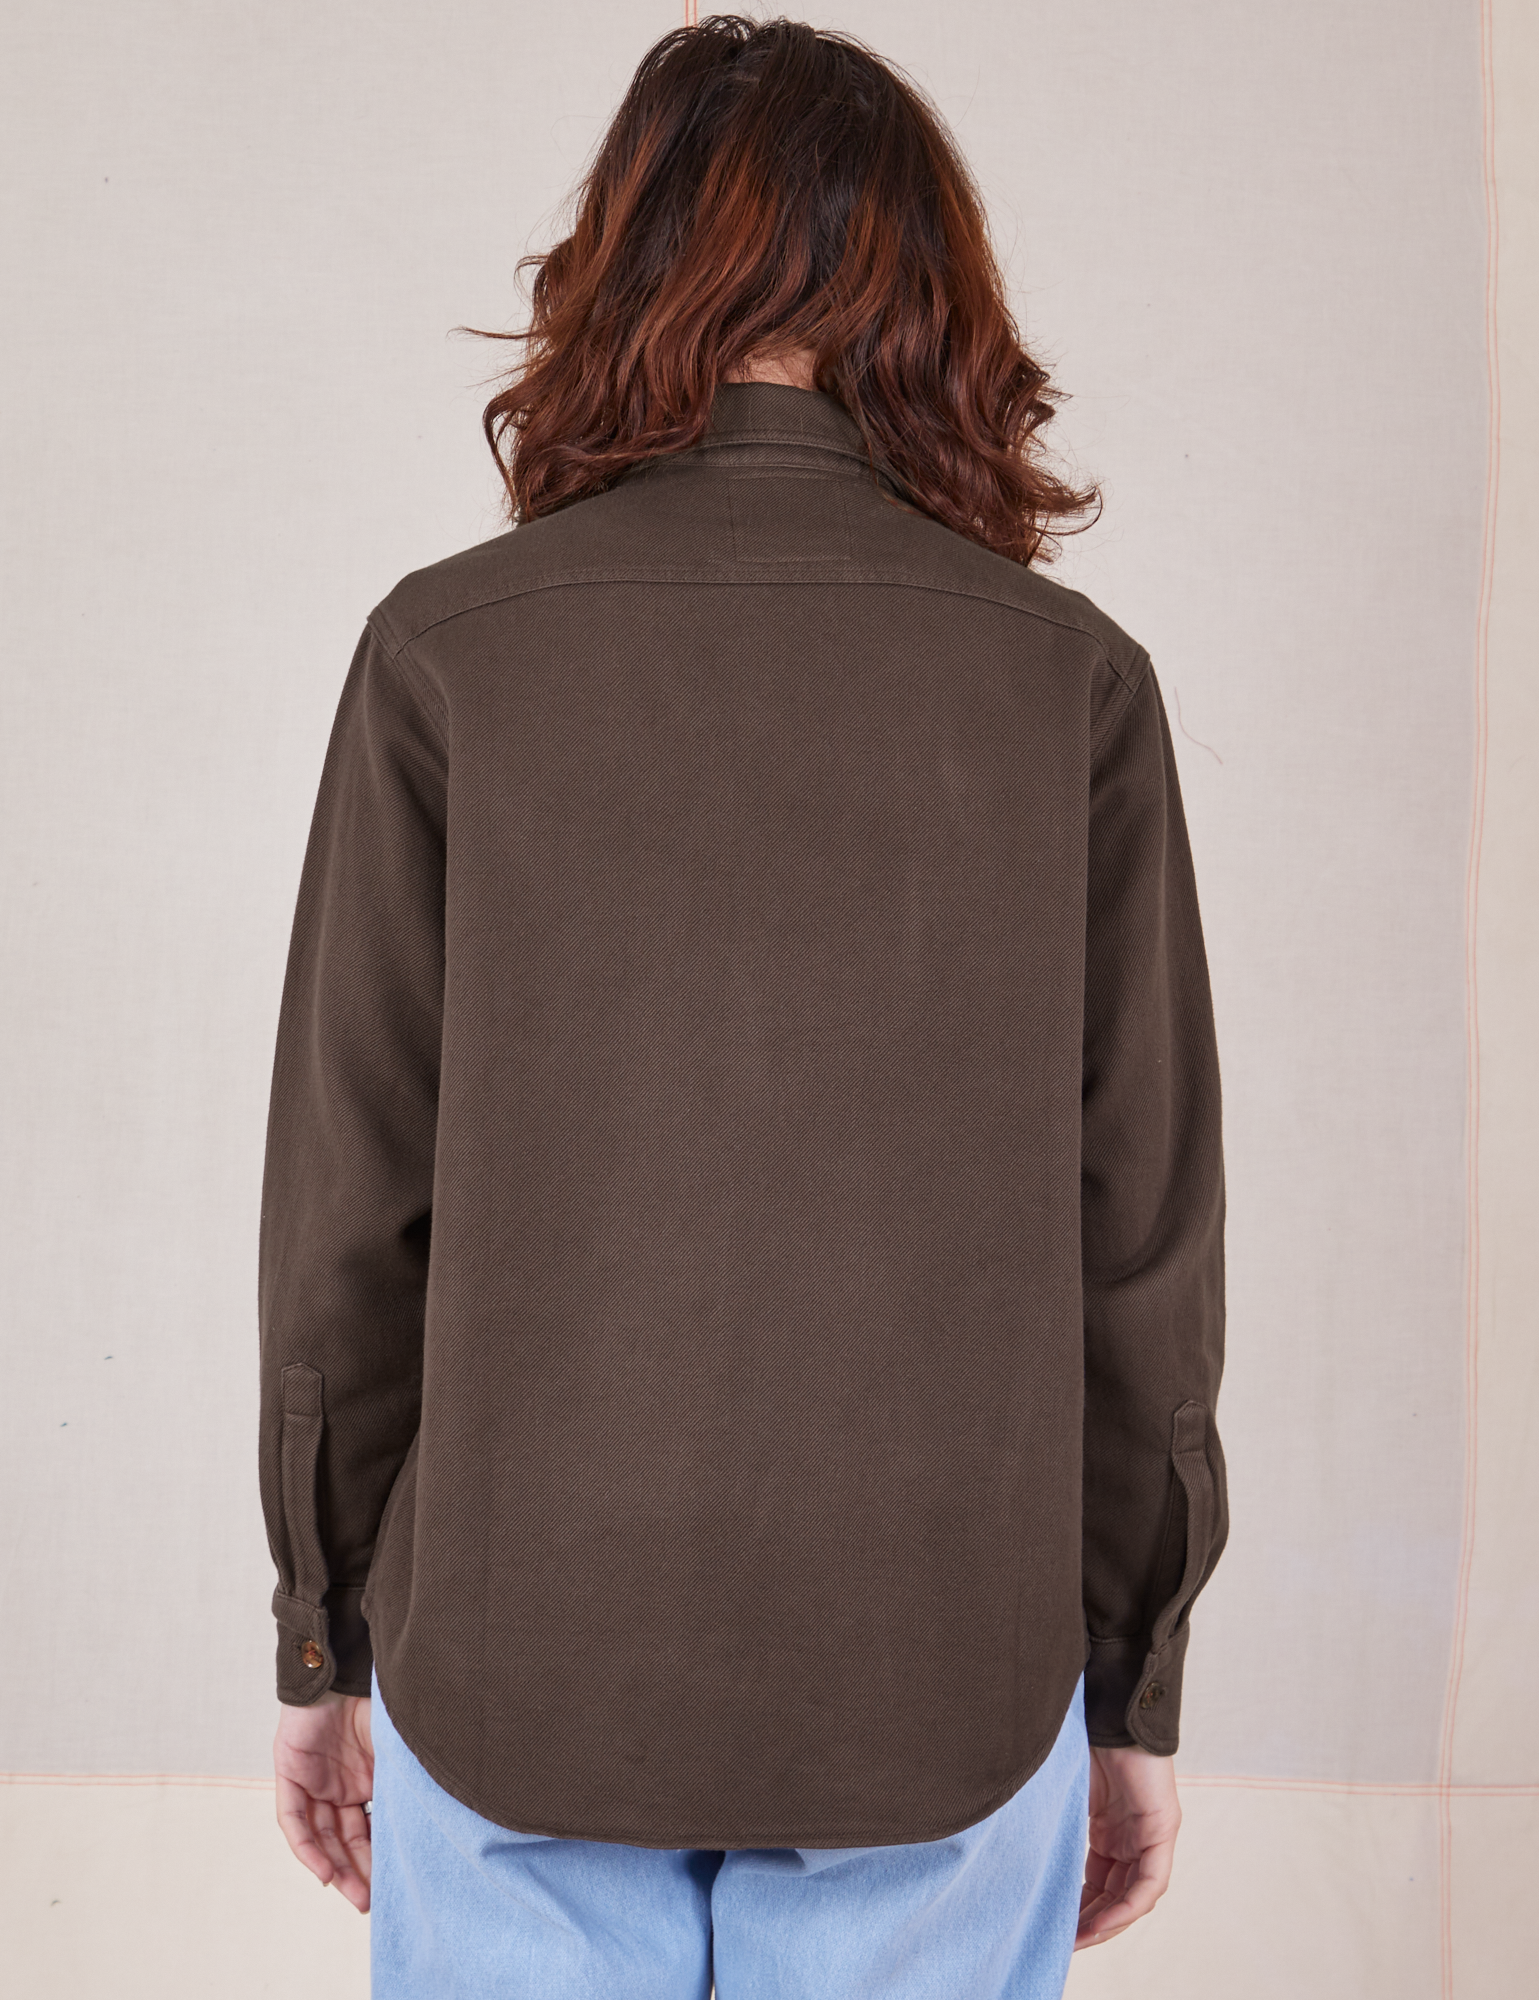 Back view of Flannel Overshirt in Espresso Brown on Alex